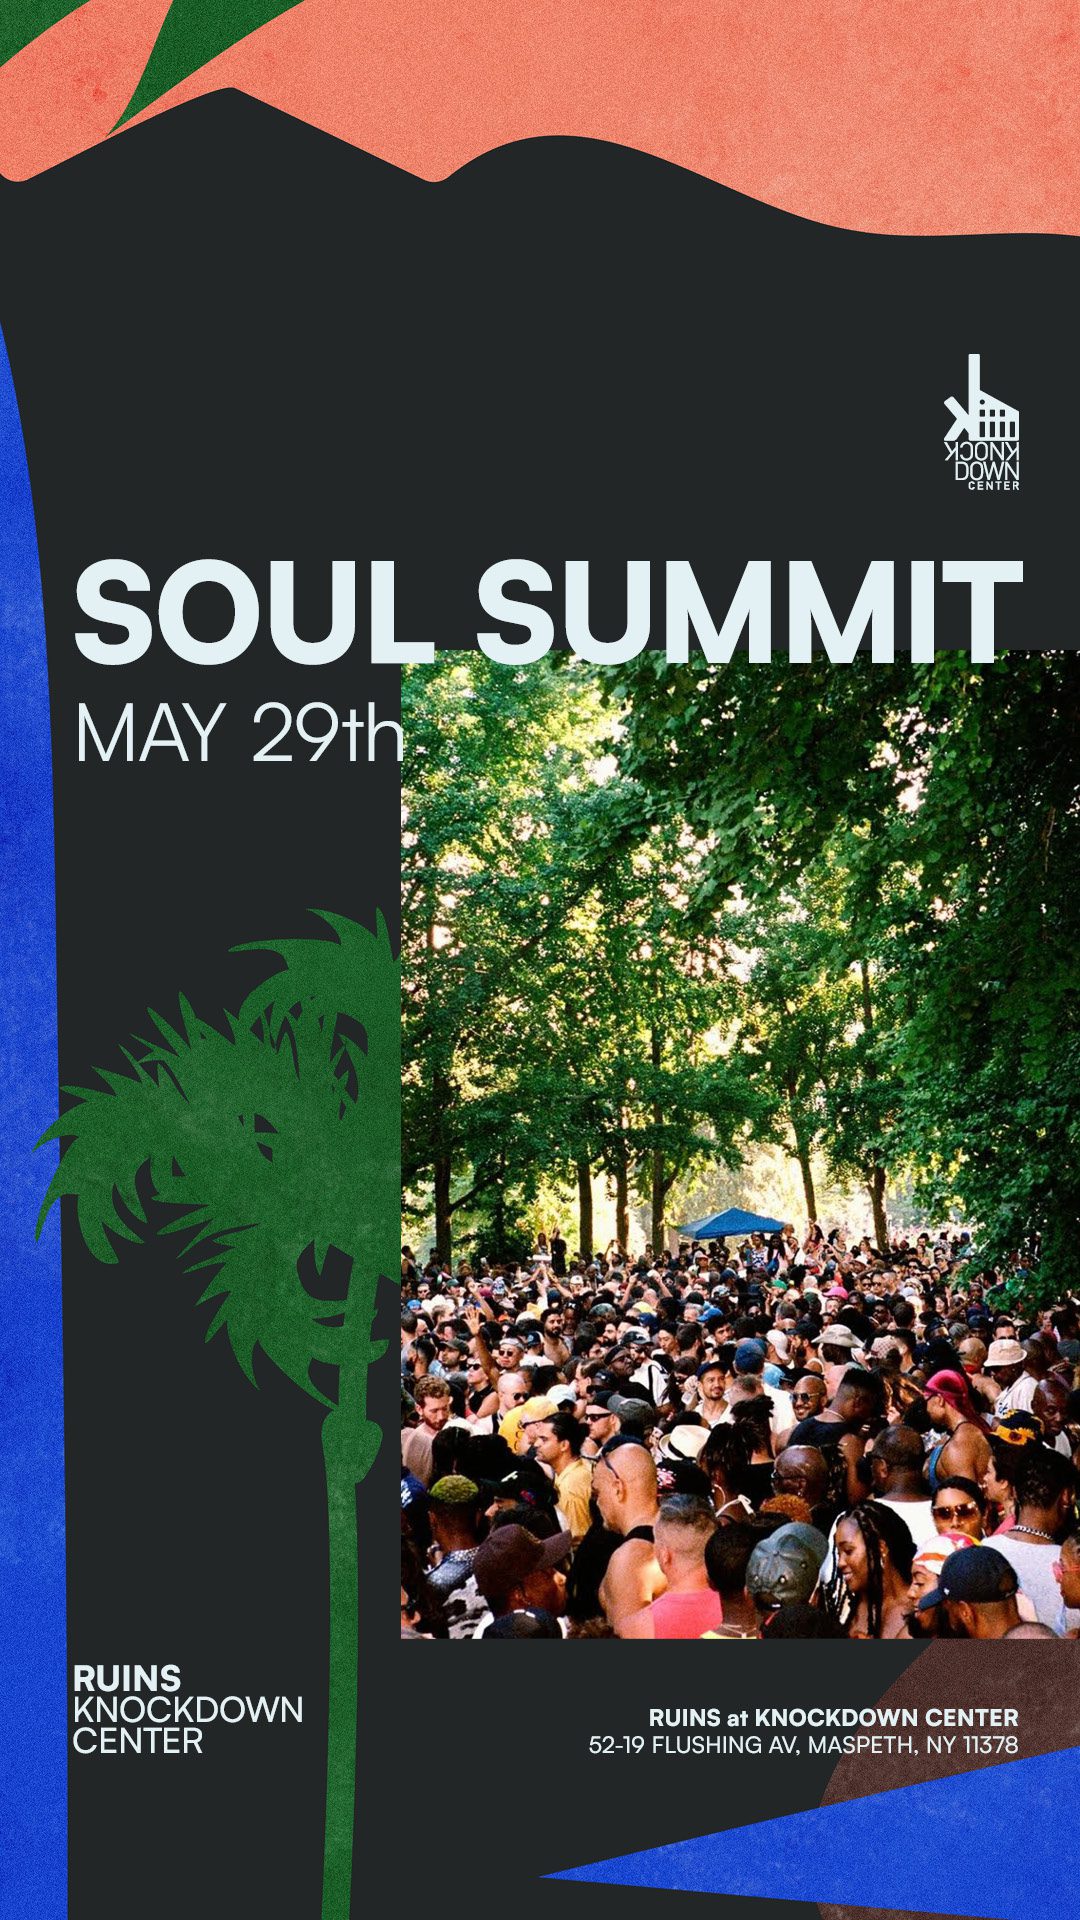 Soul Summit | The Knockdown Center